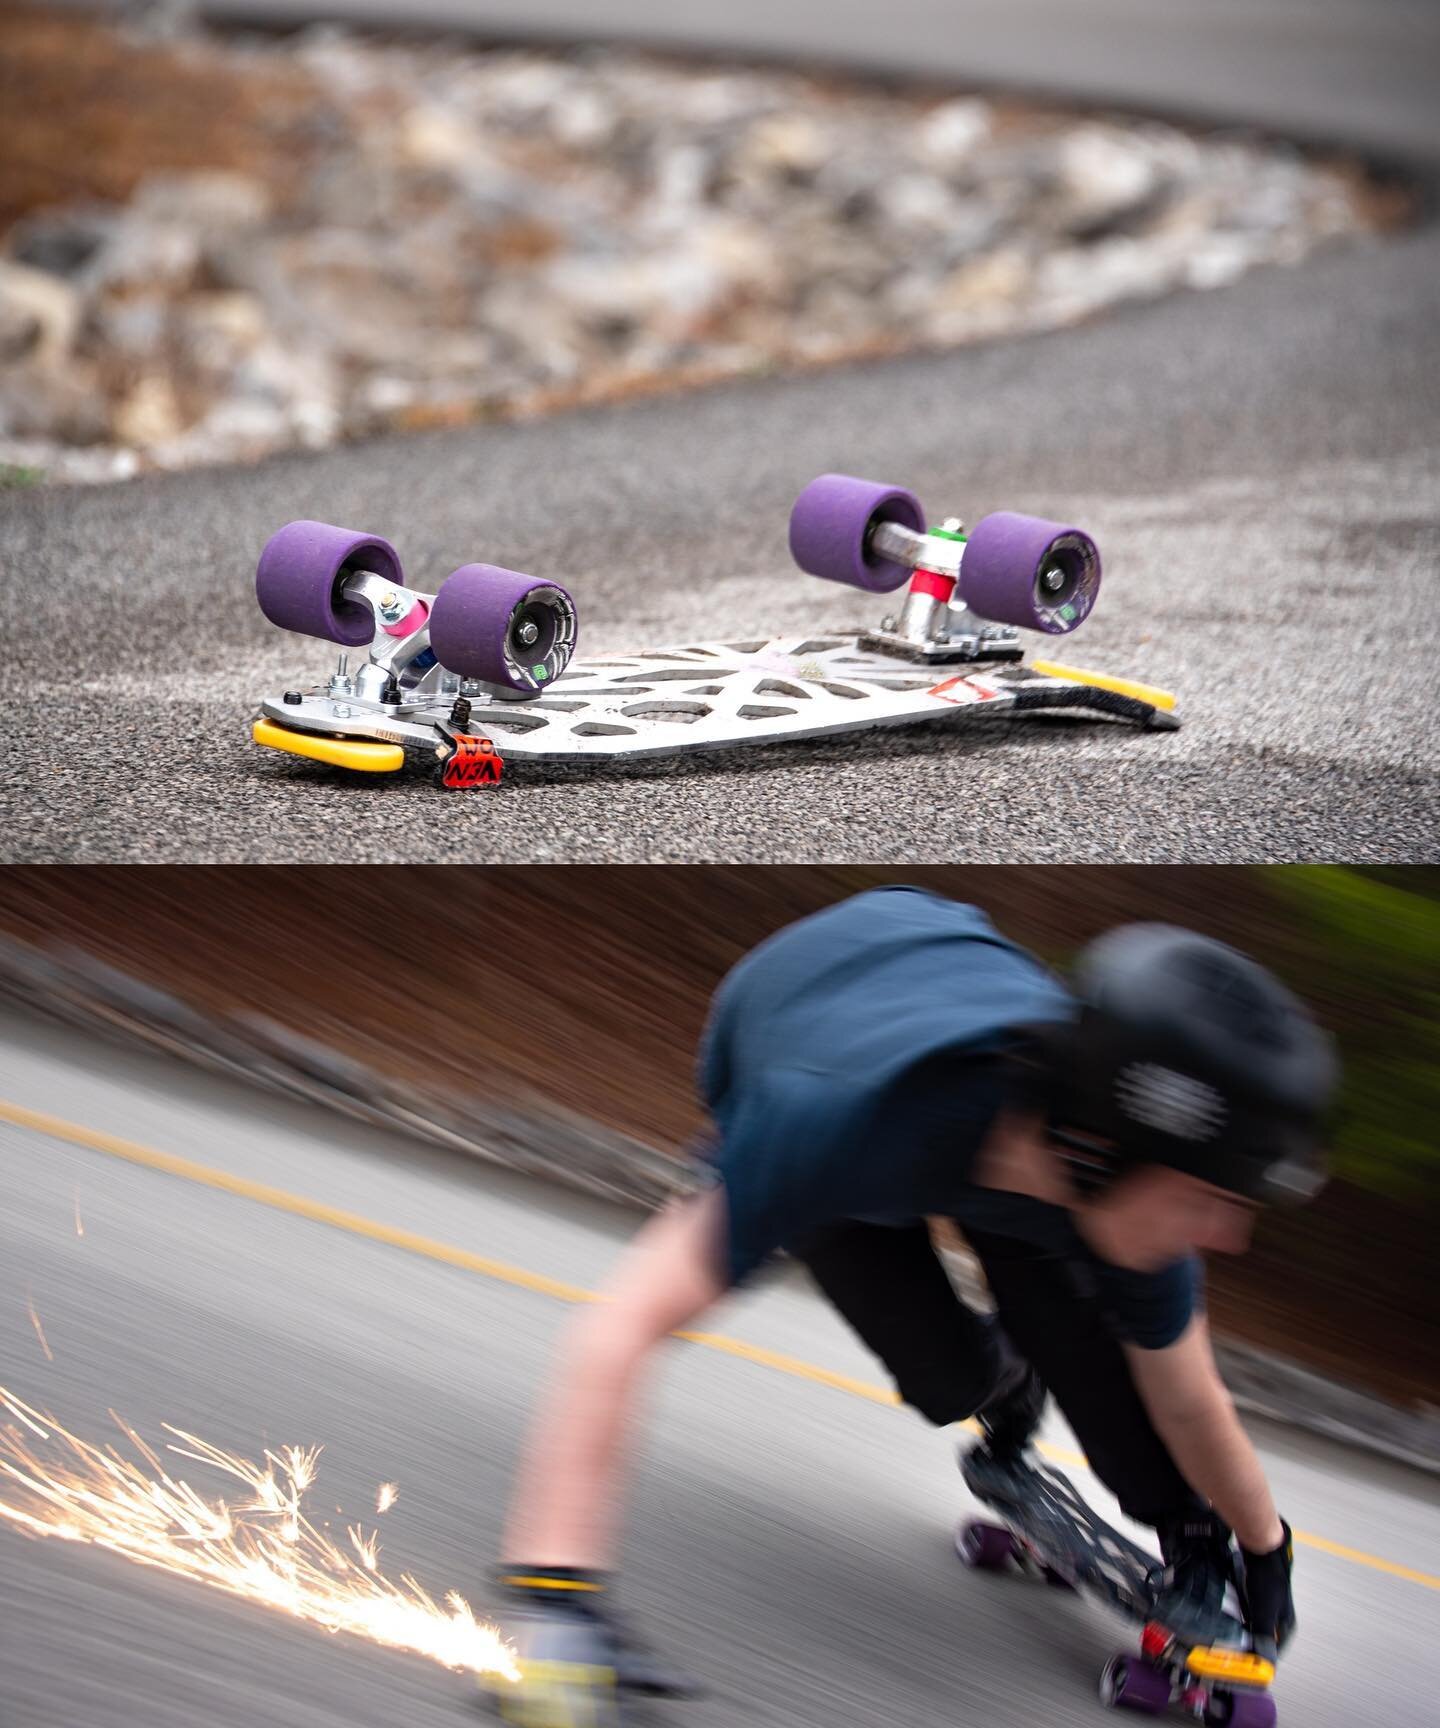 Exploring local back roads with @dabsville_cowboi on the new Zealous trucks!
👉 @ThreeSixDownhill
#ThreeSixDownhill #longboarding #longboard #downhillskateboarding #surfskate